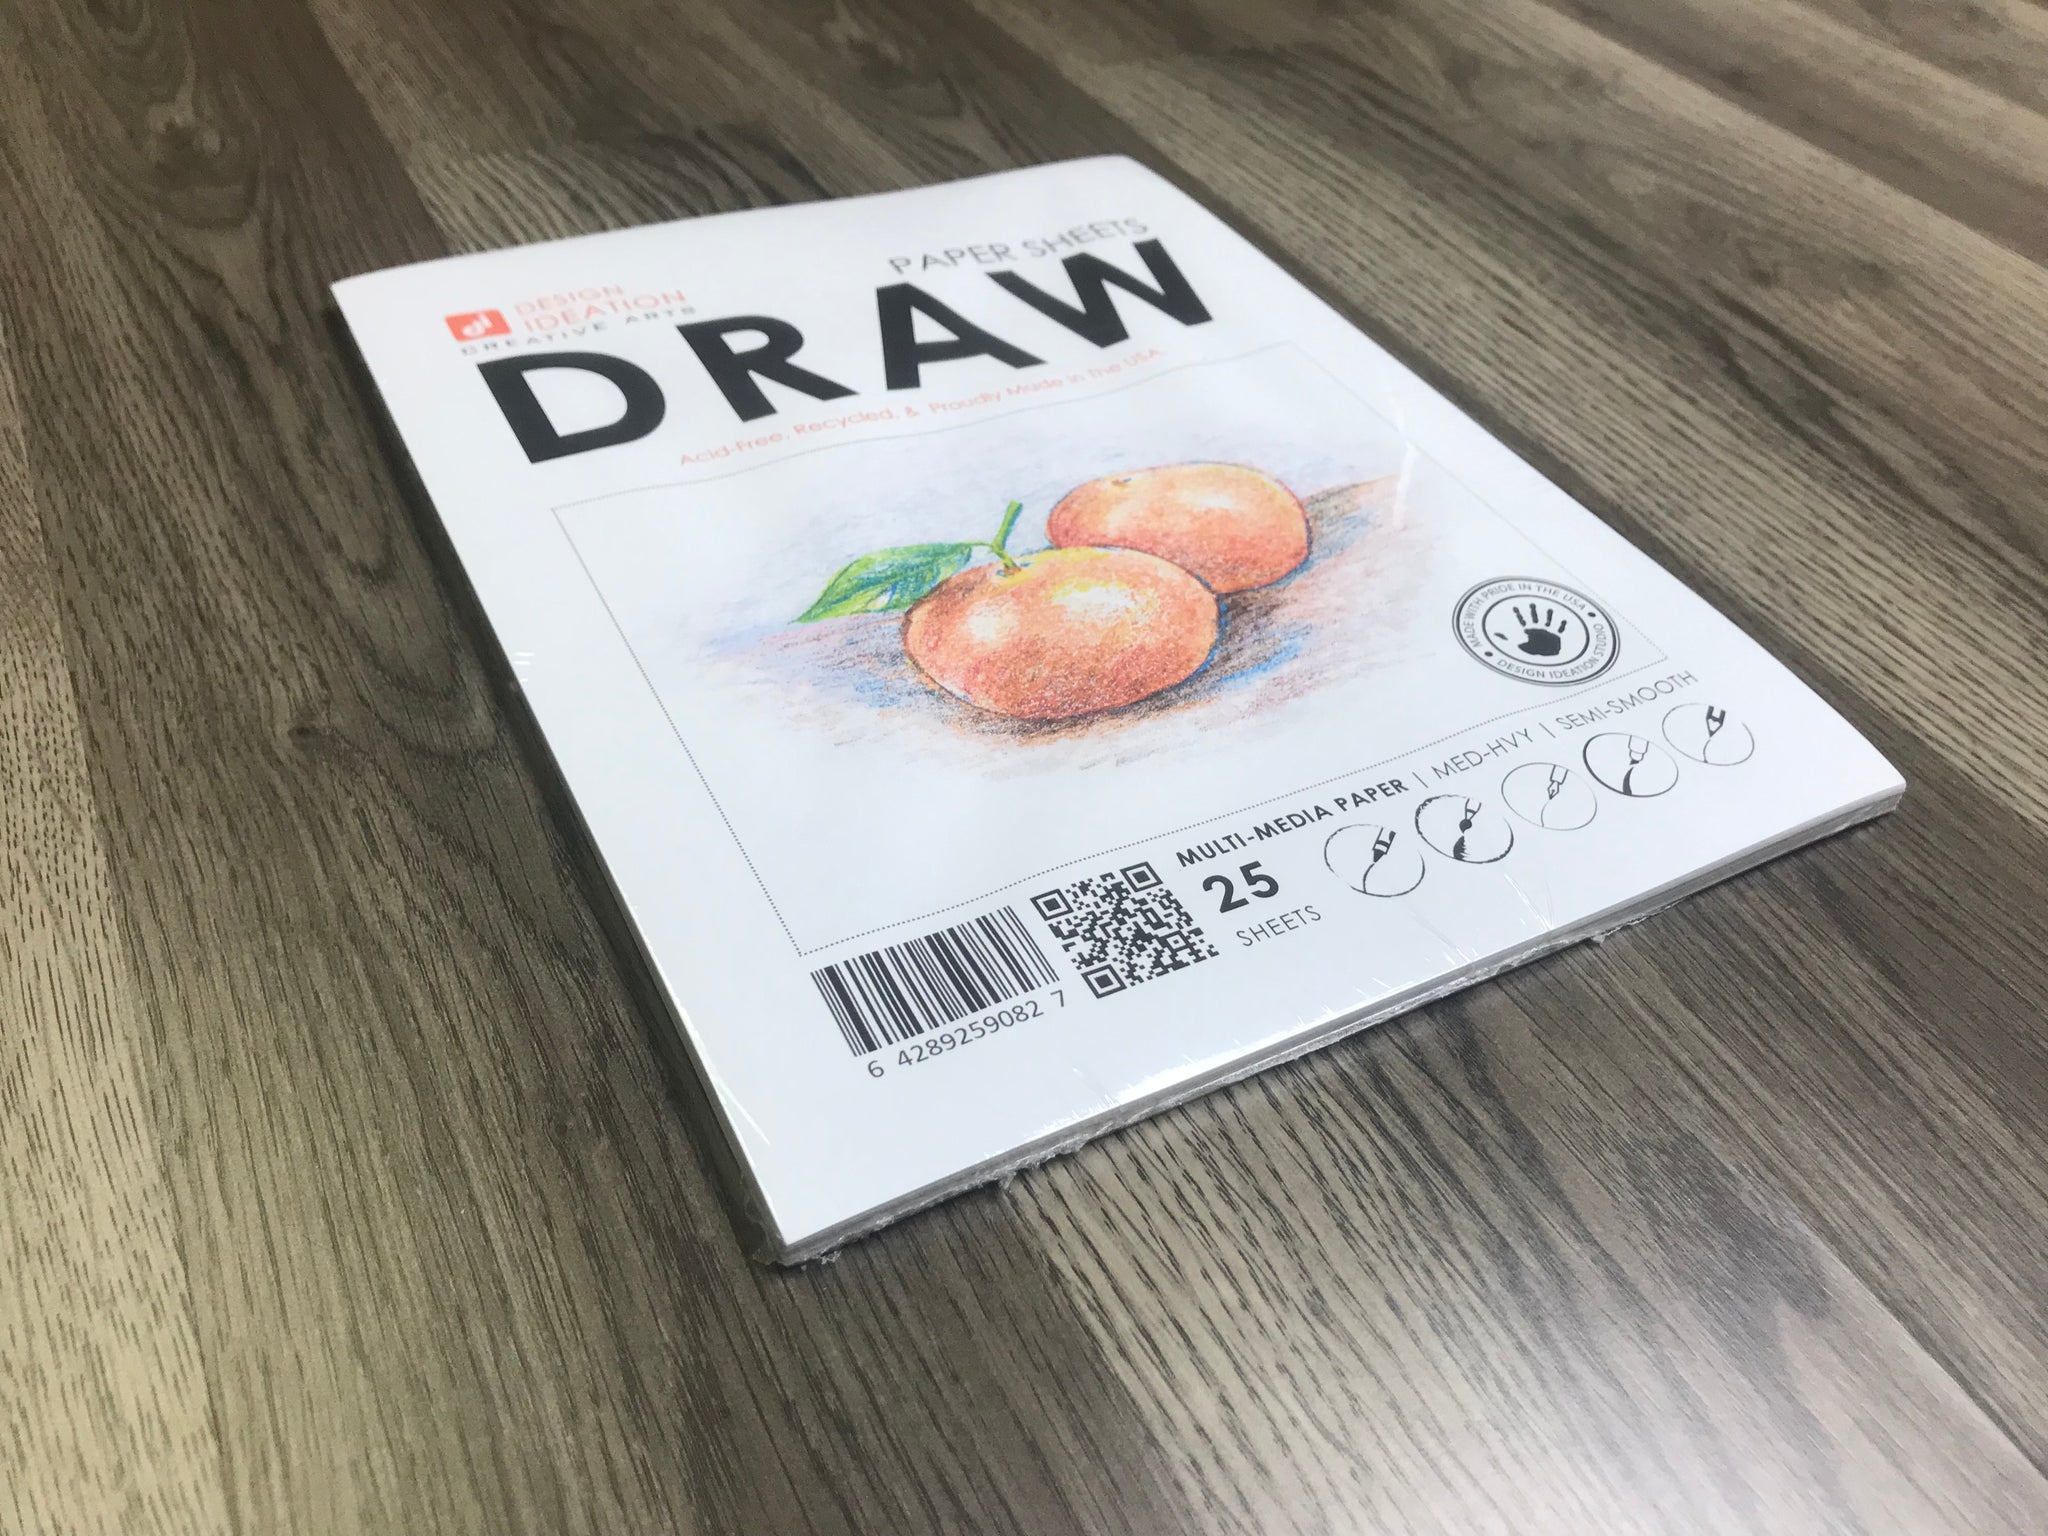 Drawing Supplies – Papers